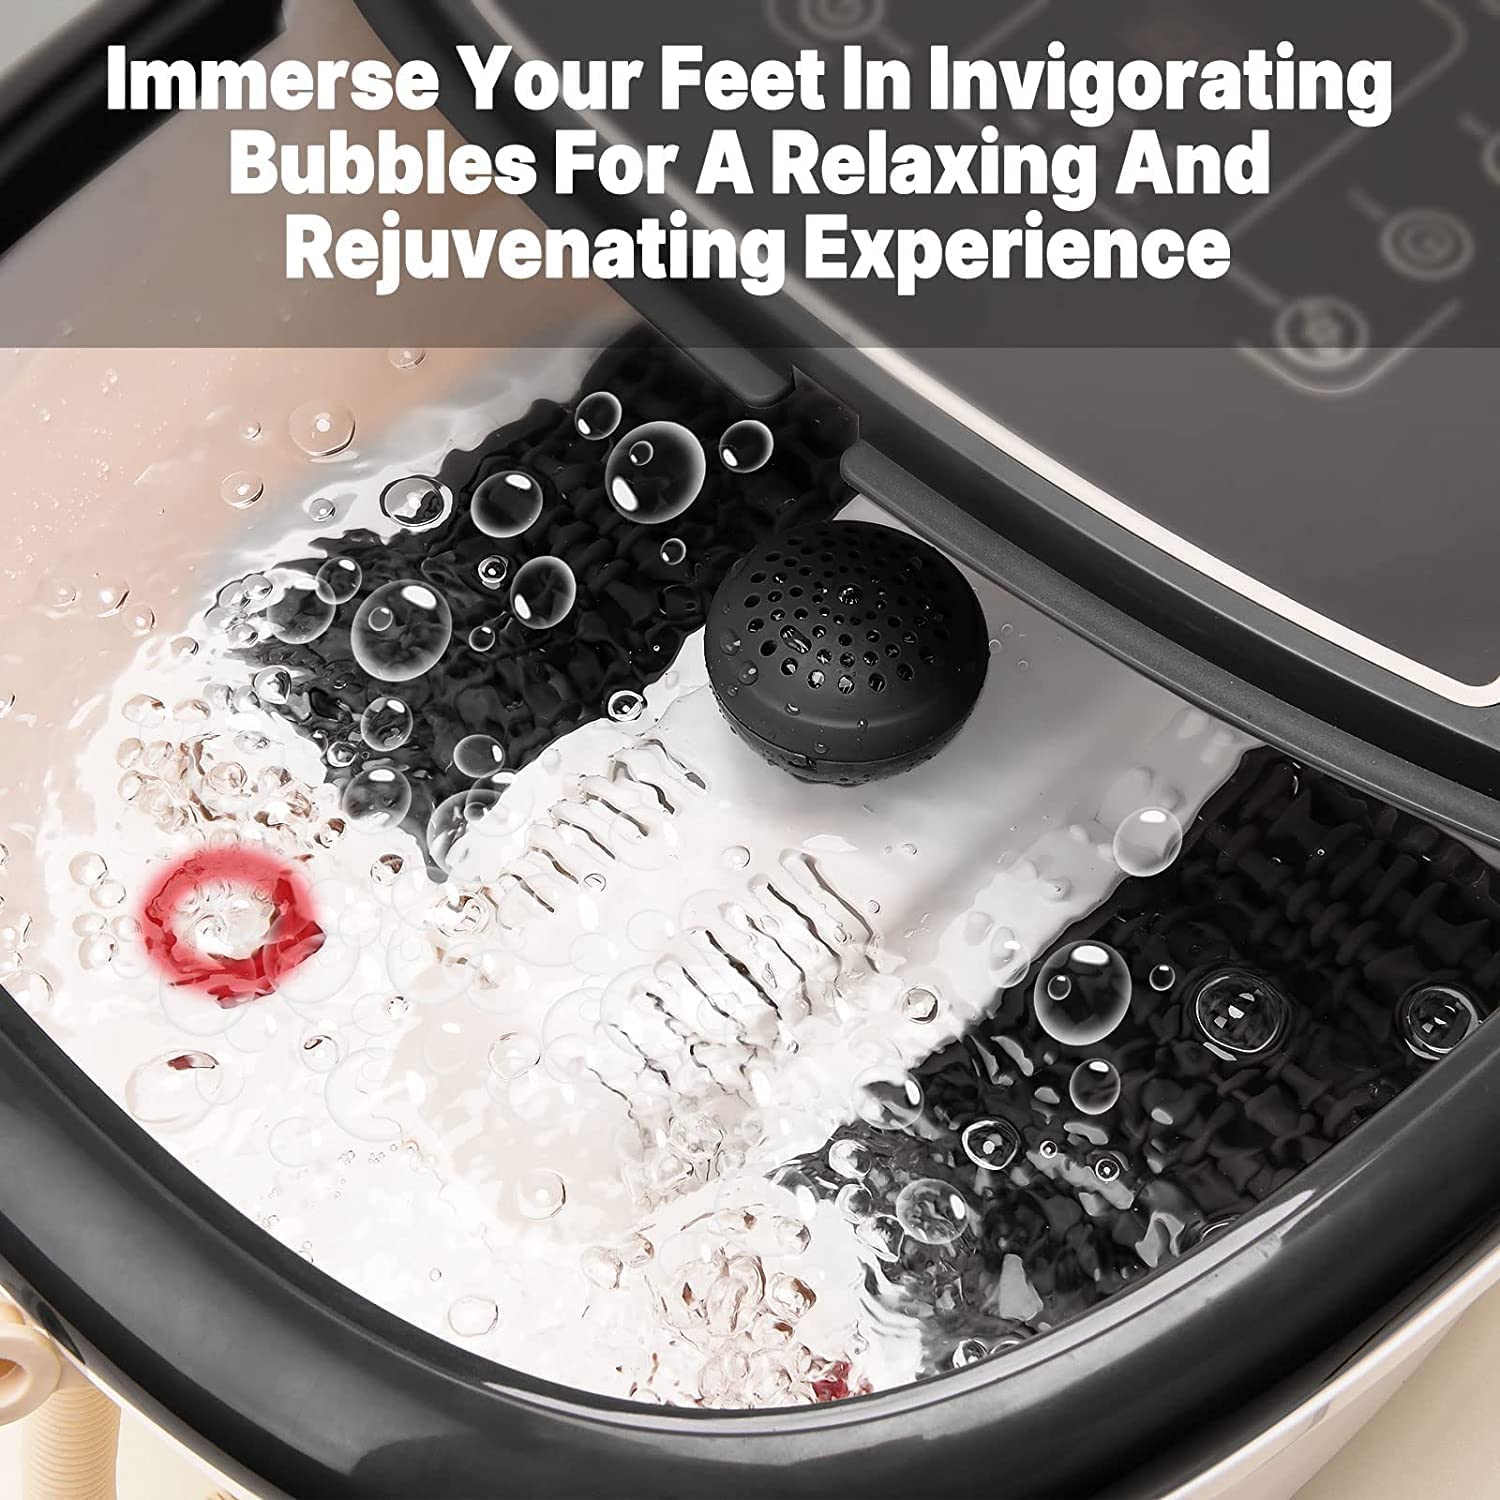 A Renpho EU foot spa massager with fast heating showing a single foot immersed in bubbling water, demonstrating the spa's features like textured bottom and water jets for massage, with red nail polish on toenails and a portion of the foot.